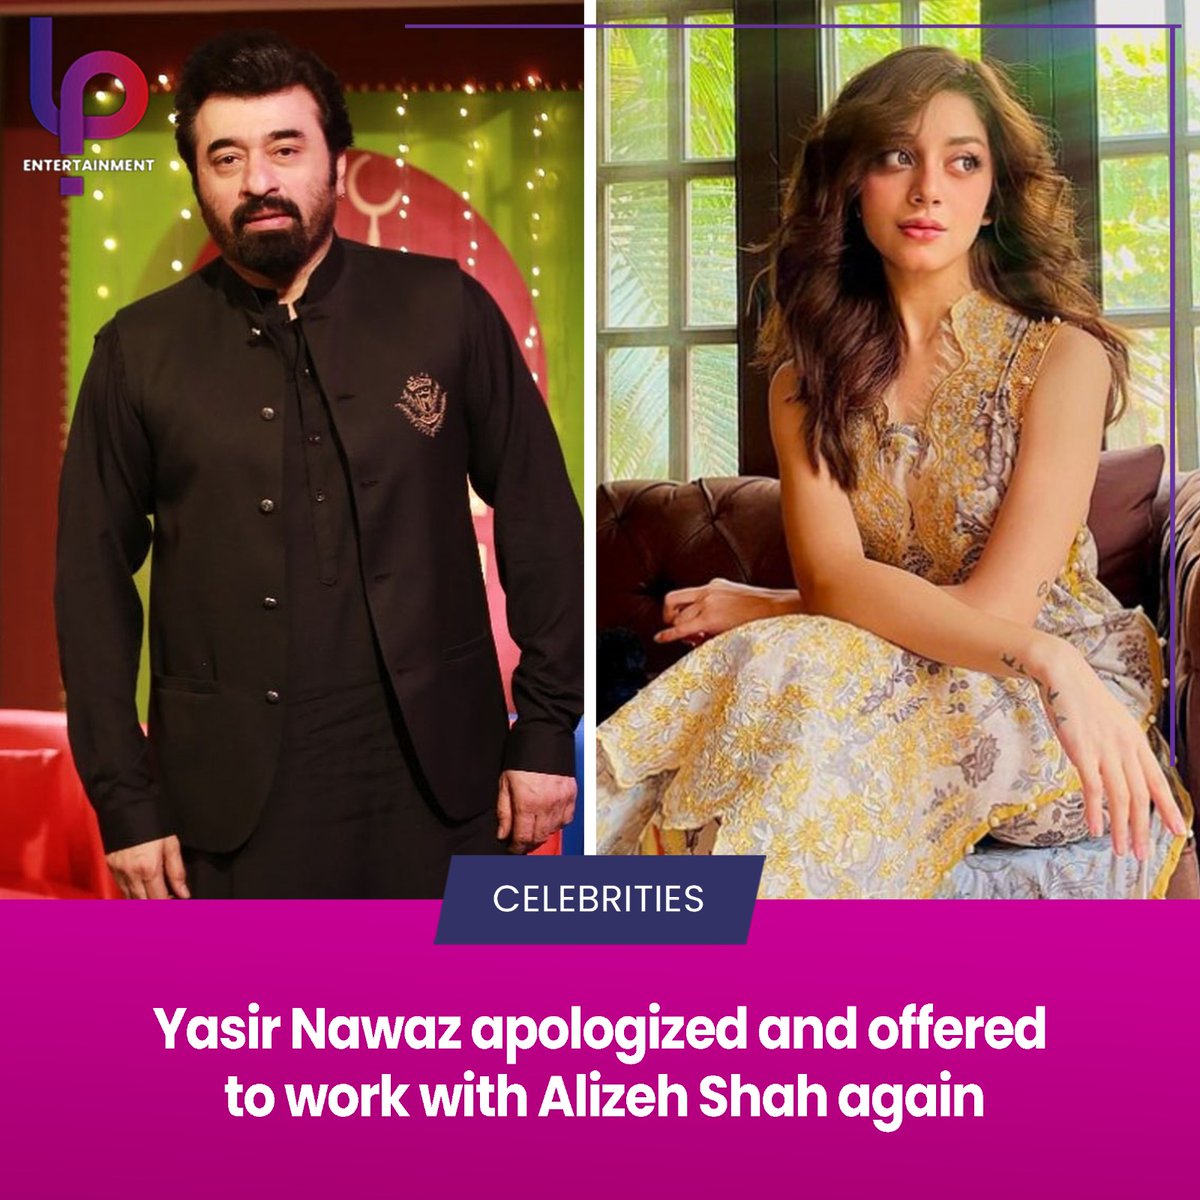 Pakistan's senior actor, director, and producer Yasir Nawaz has apologized for the statement made regarding actress Alizeh Shah in the past.
He expressed his desire to work with her again in his recent interview. 

#yasirnawaz #filmdirector #alizehshah #lpentertainment